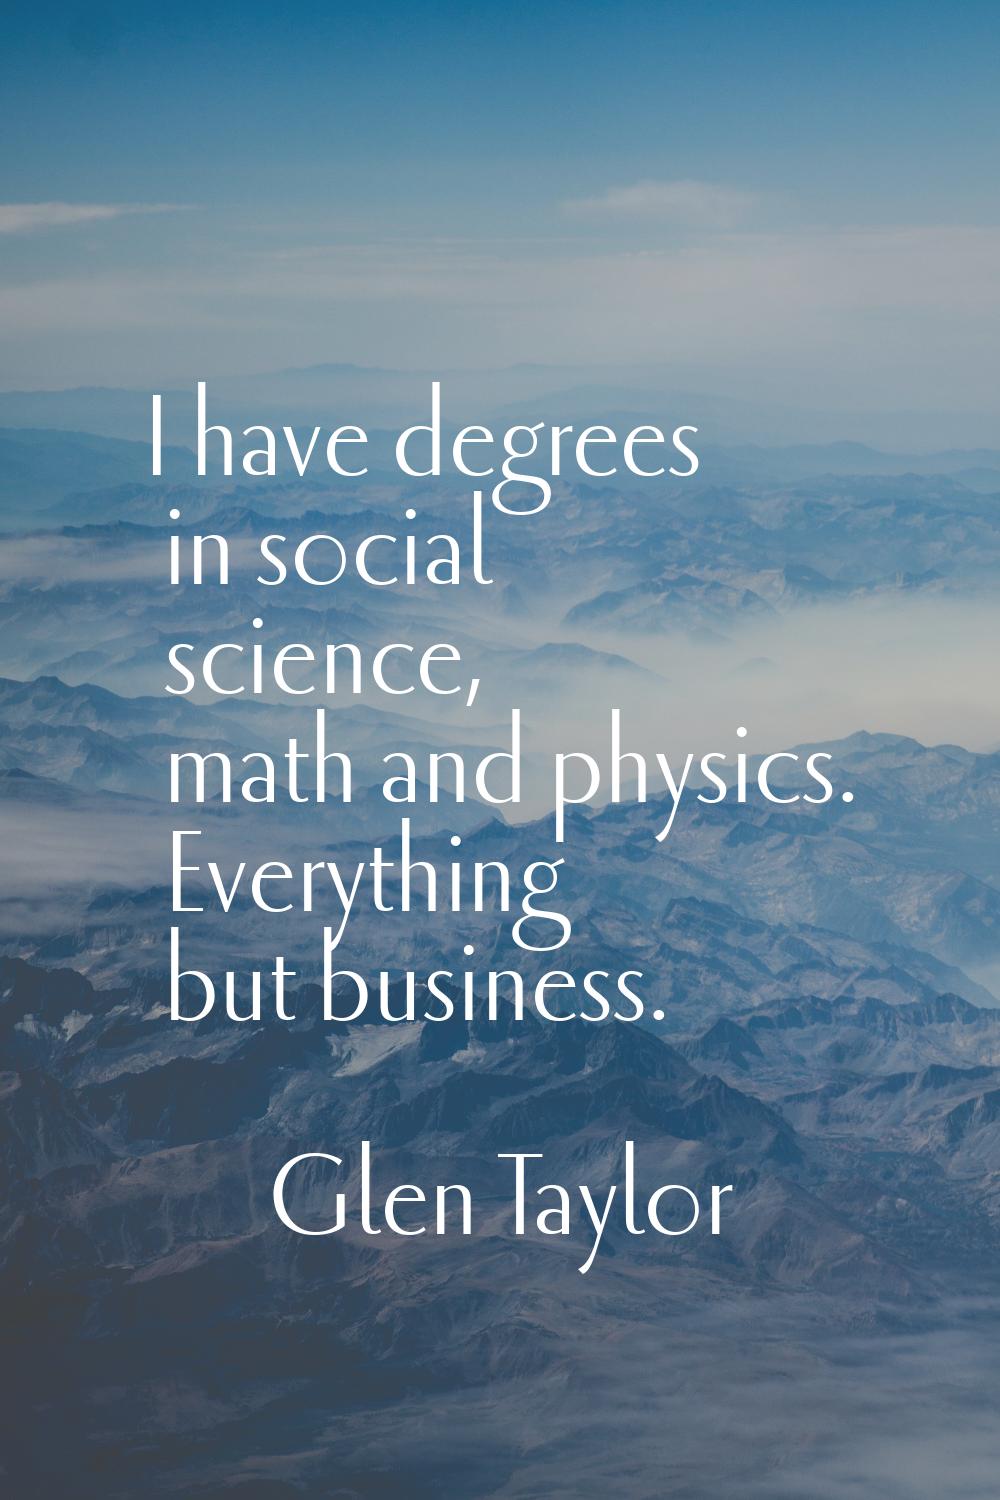 I have degrees in social science, math and physics. Everything but business.